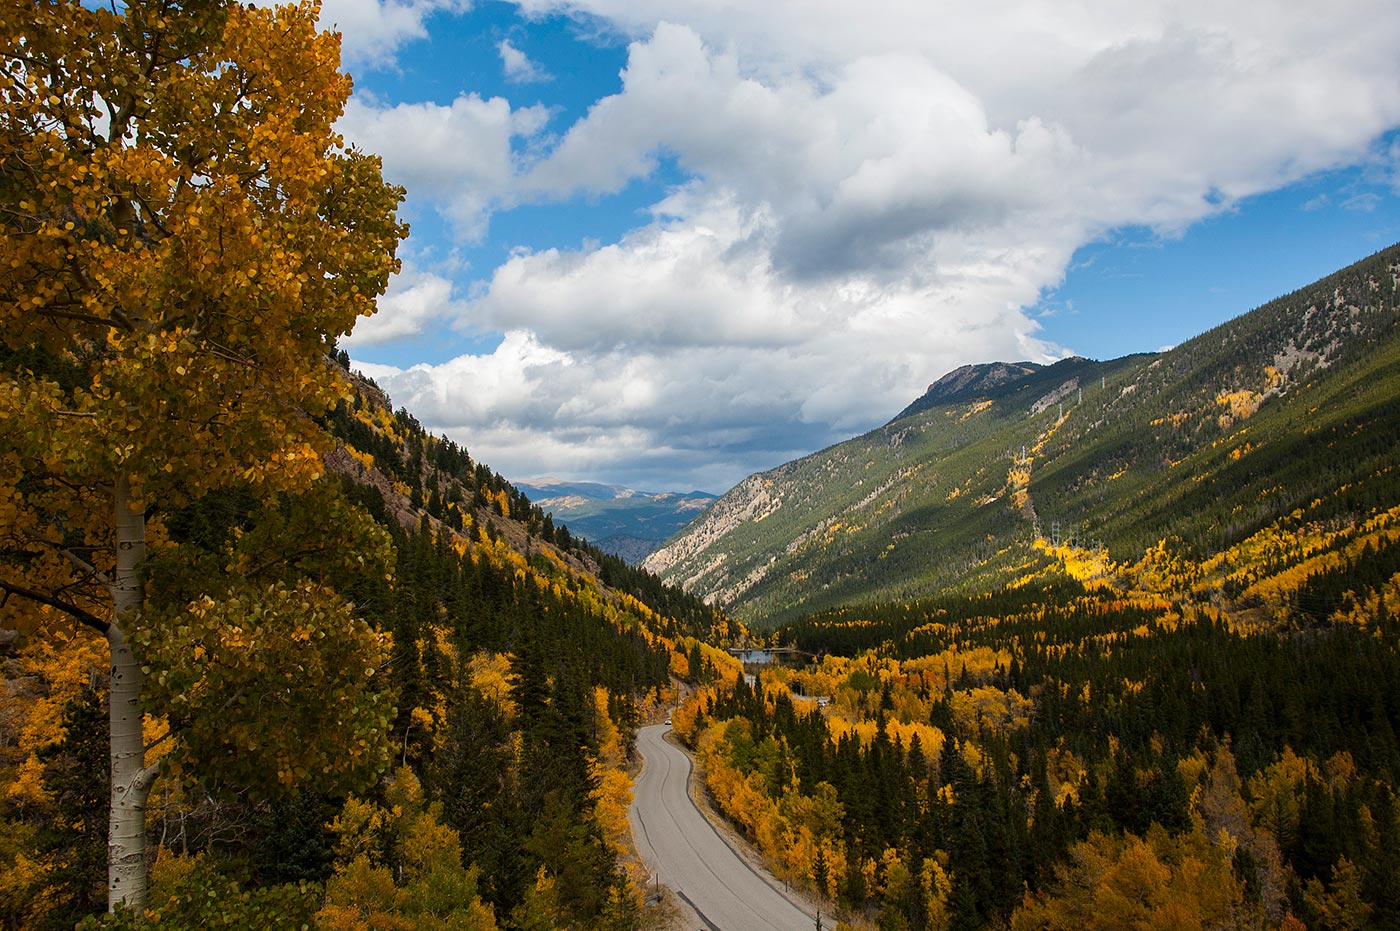 view of guanella pass and the vibrant yellow aspen leaves surrounding the road